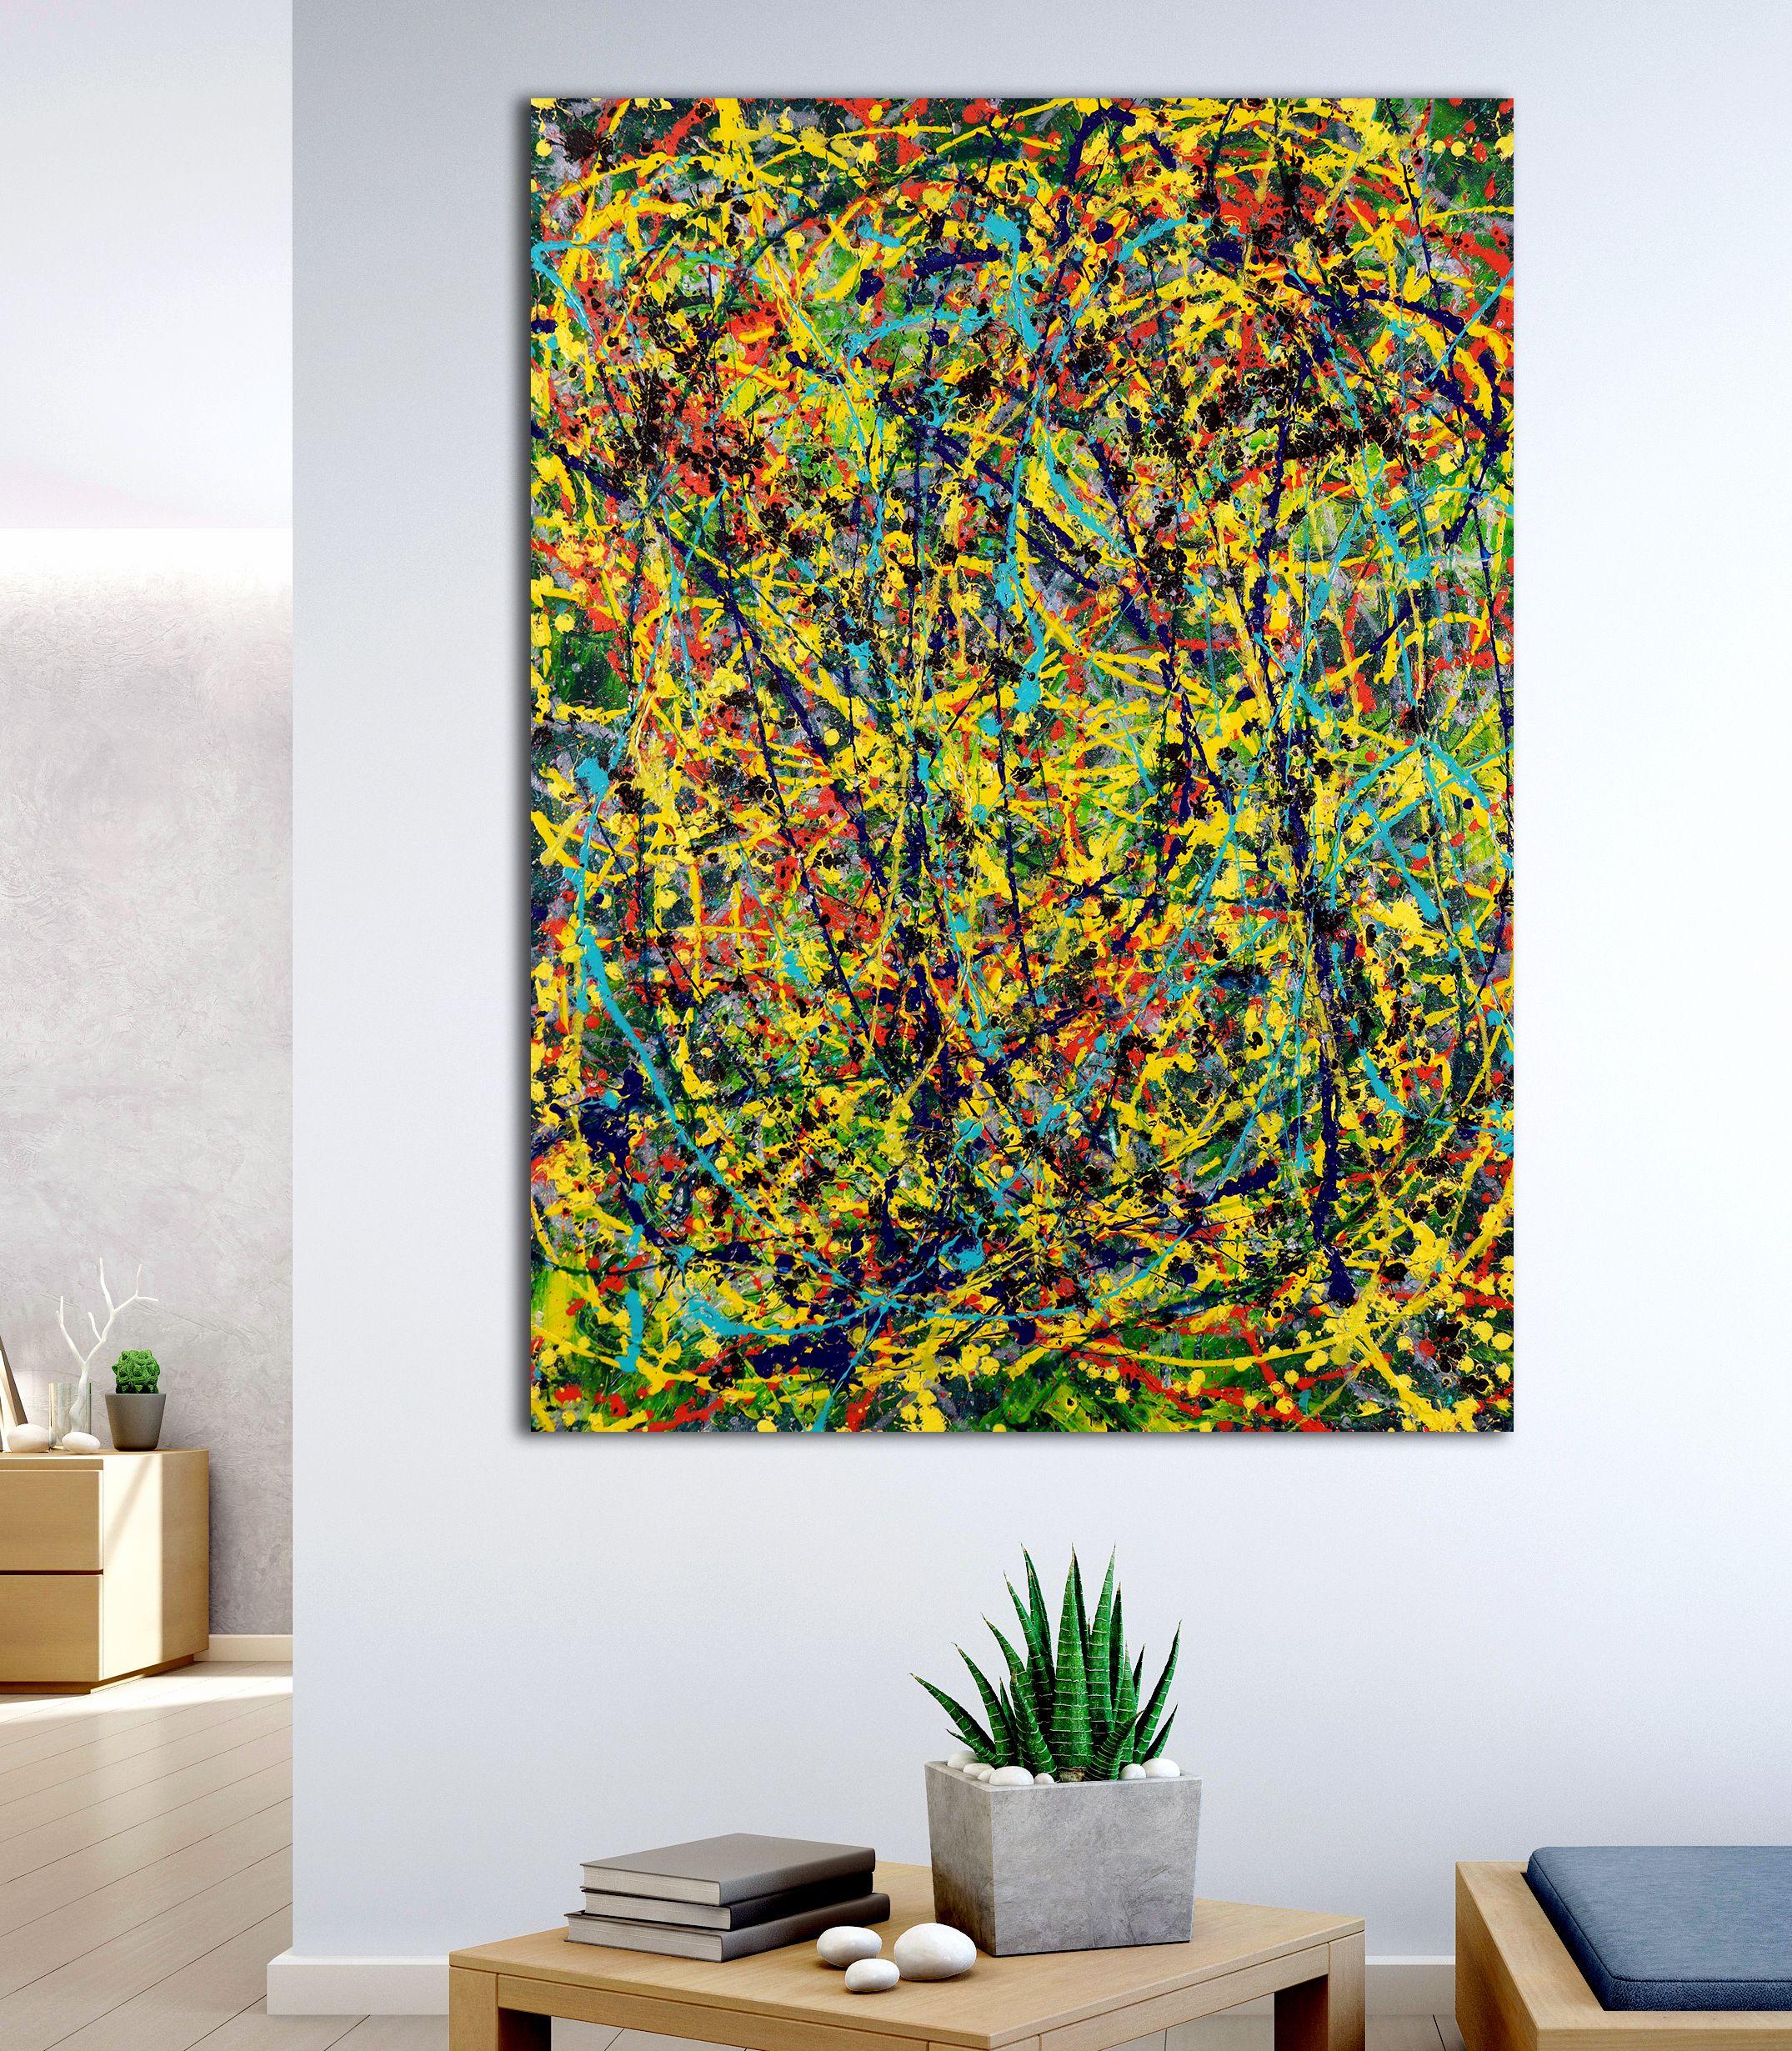 Expressionistic abstract painting with teal, blue, yellow, iridescent clear paint, black, green and lots of iridescence. Completed with gestural motion and energy. Can be displayed in multiple orientations. Signed on the back or front on request.   